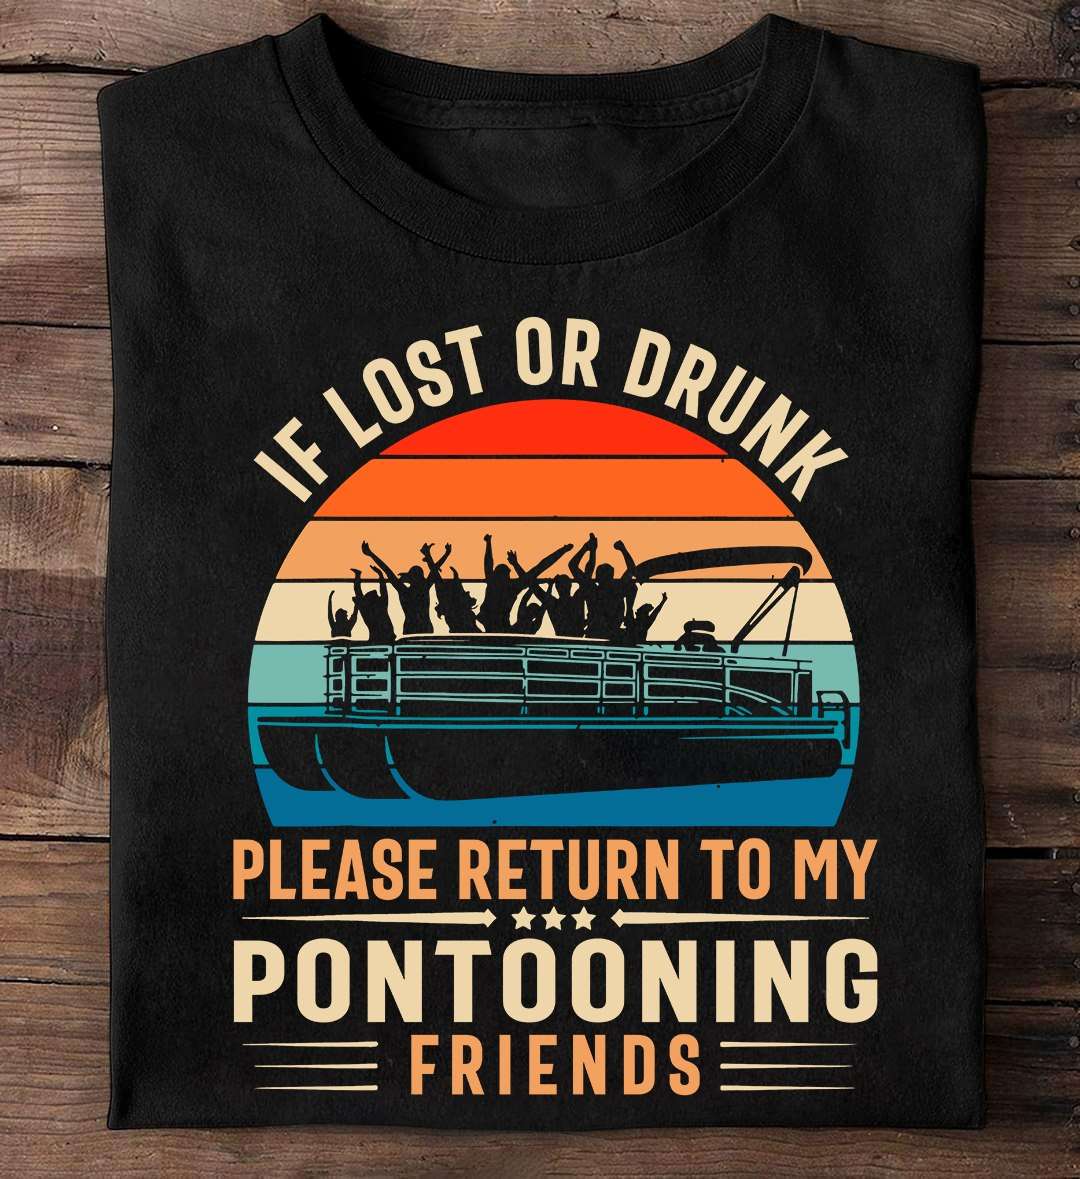 Pontoon With Friends - If lost or drunk please return to my pontooning friends